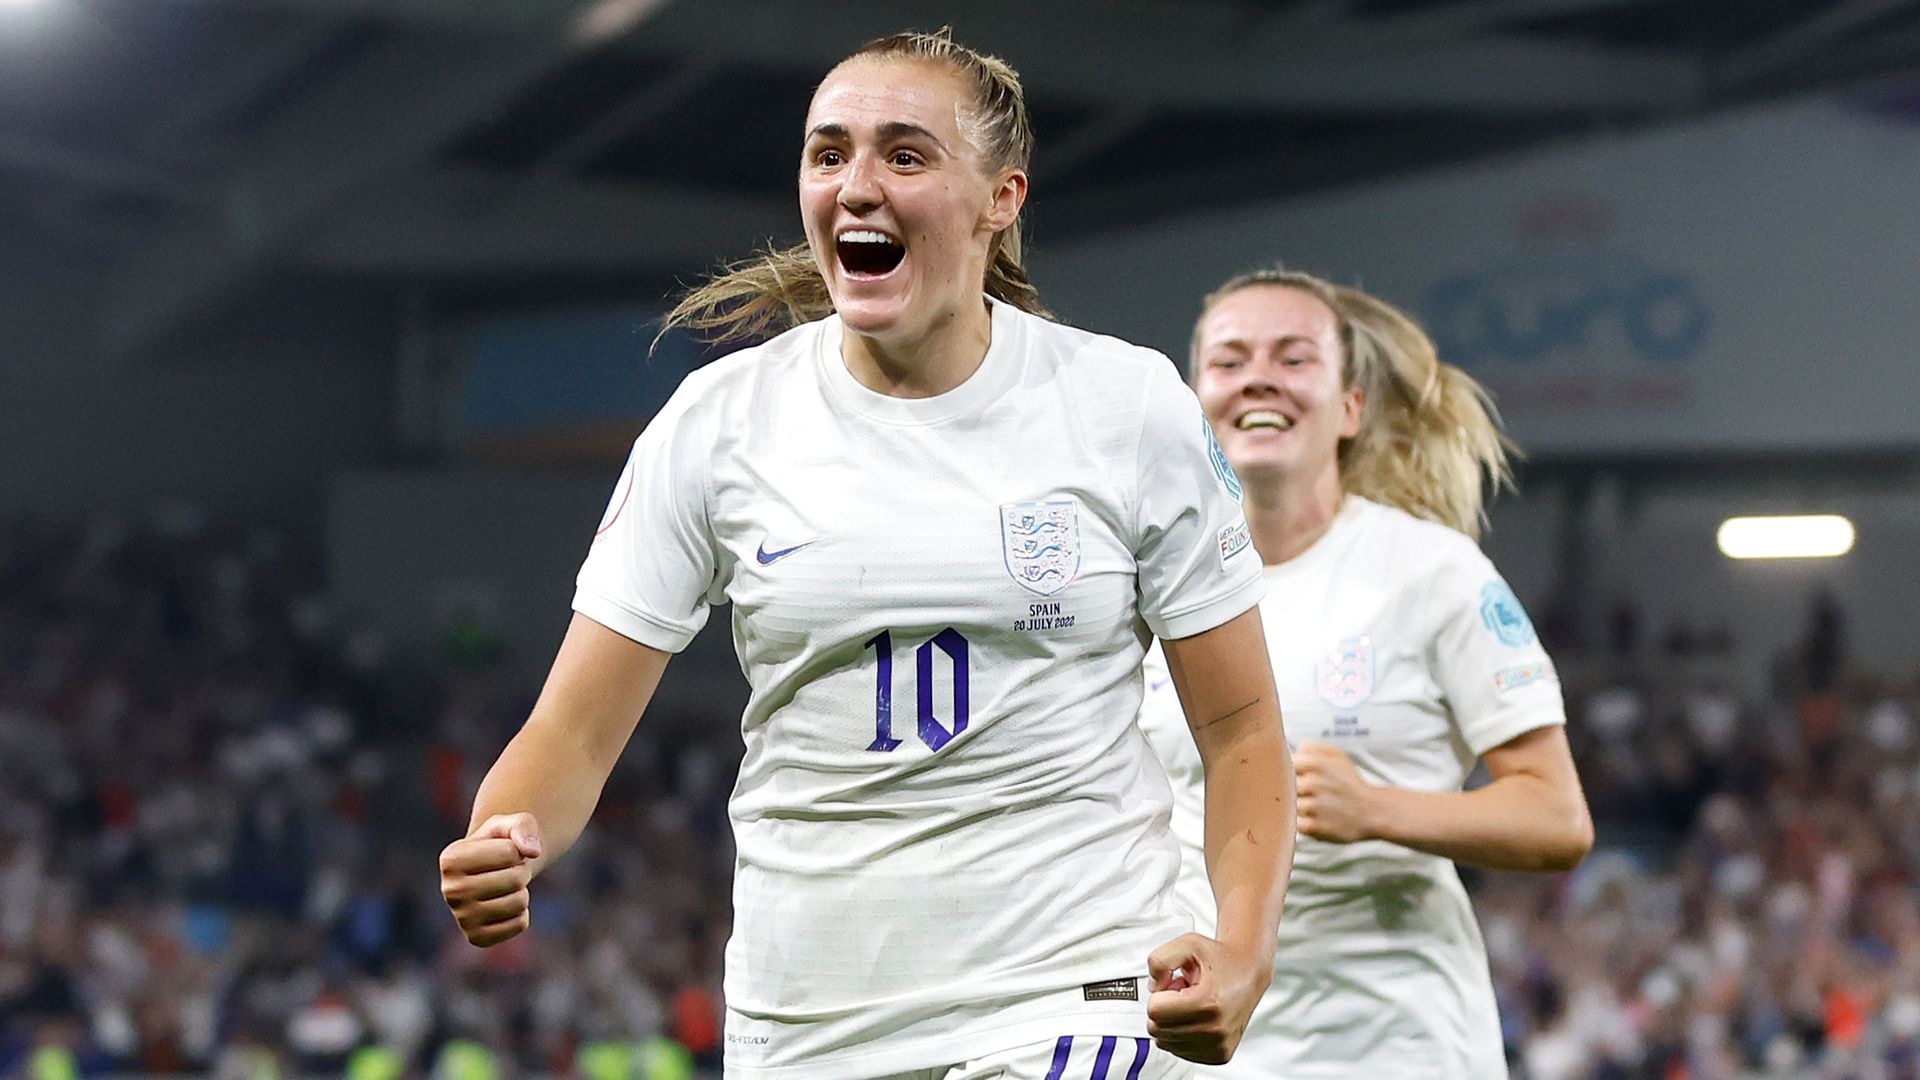 England Women 2-1 Spain Women (AET): Georgia Stanway’s extra-time stunner sees Lionesses into Euro 2022 semi-finals